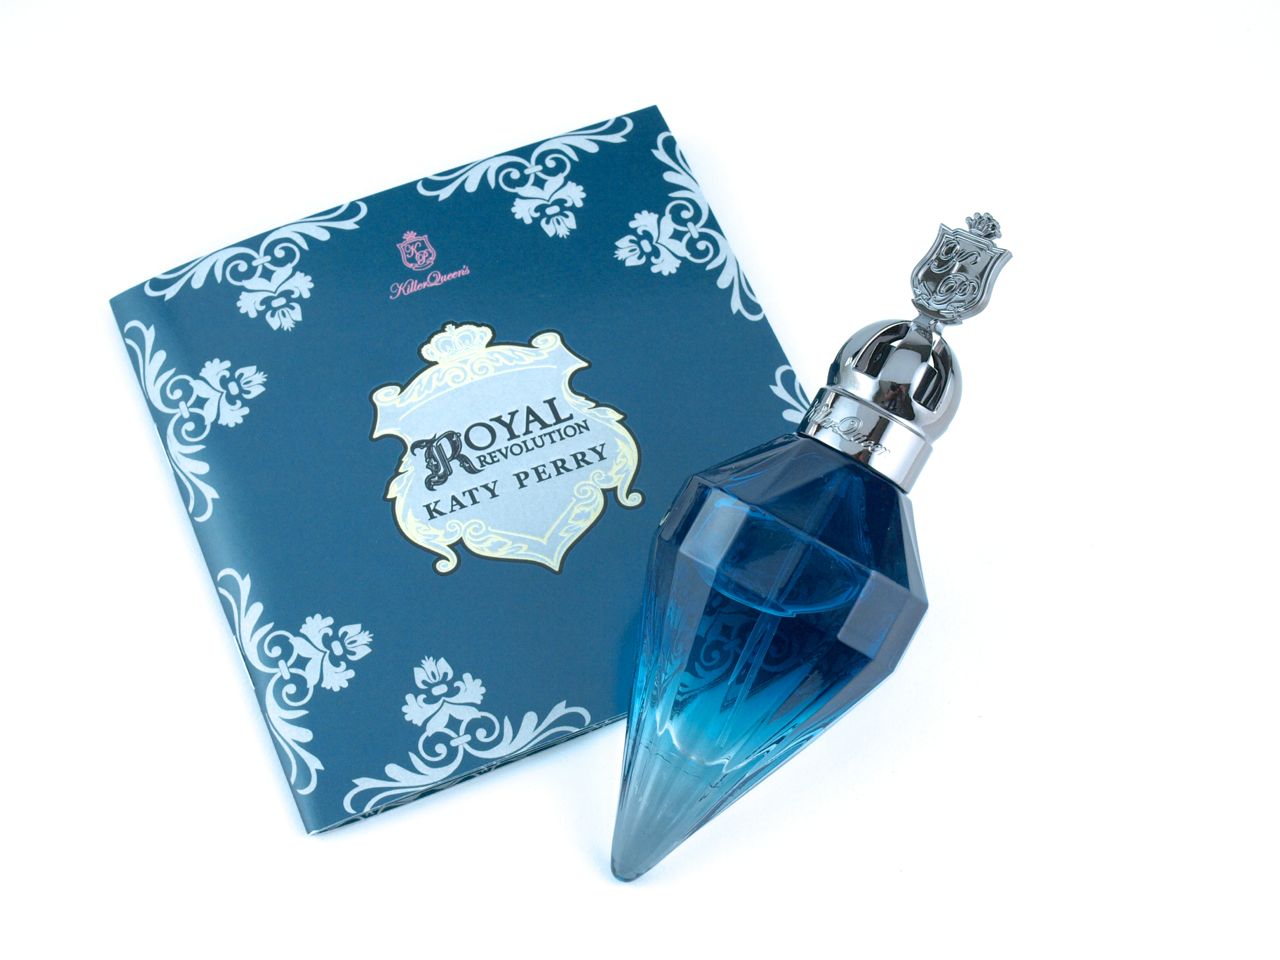 symptom Uskyldig præsentation Katy Perry Killer Queen's Royal Revolution Eau de Parfum: Review | The  Happy Sloths: Beauty, Makeup, and Skincare Blog with Reviews and Swatches